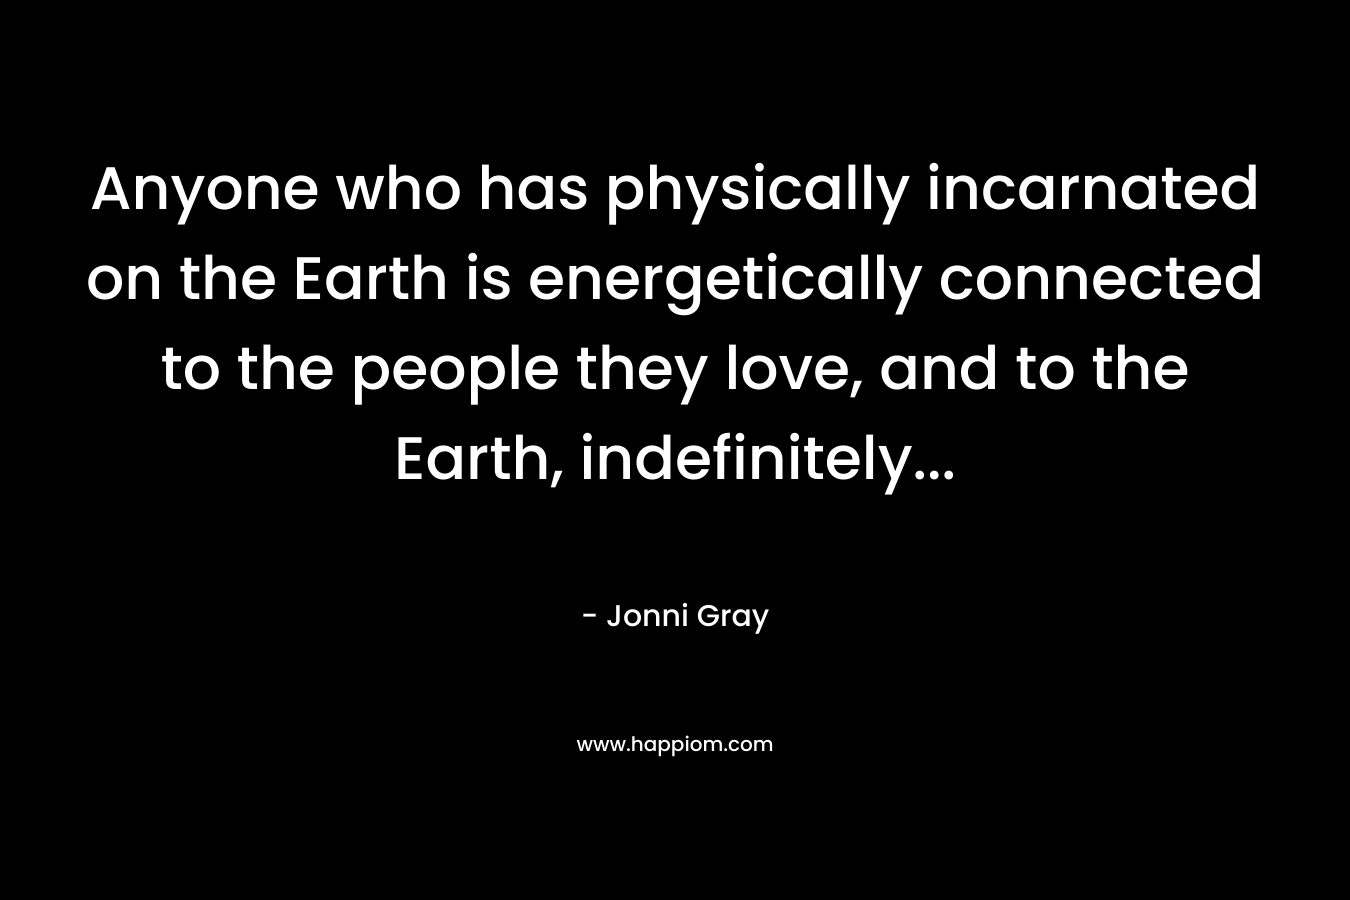 Anyone who has physically incarnated on the Earth is energetically connected to the people they love, and to the Earth, indefinitely...